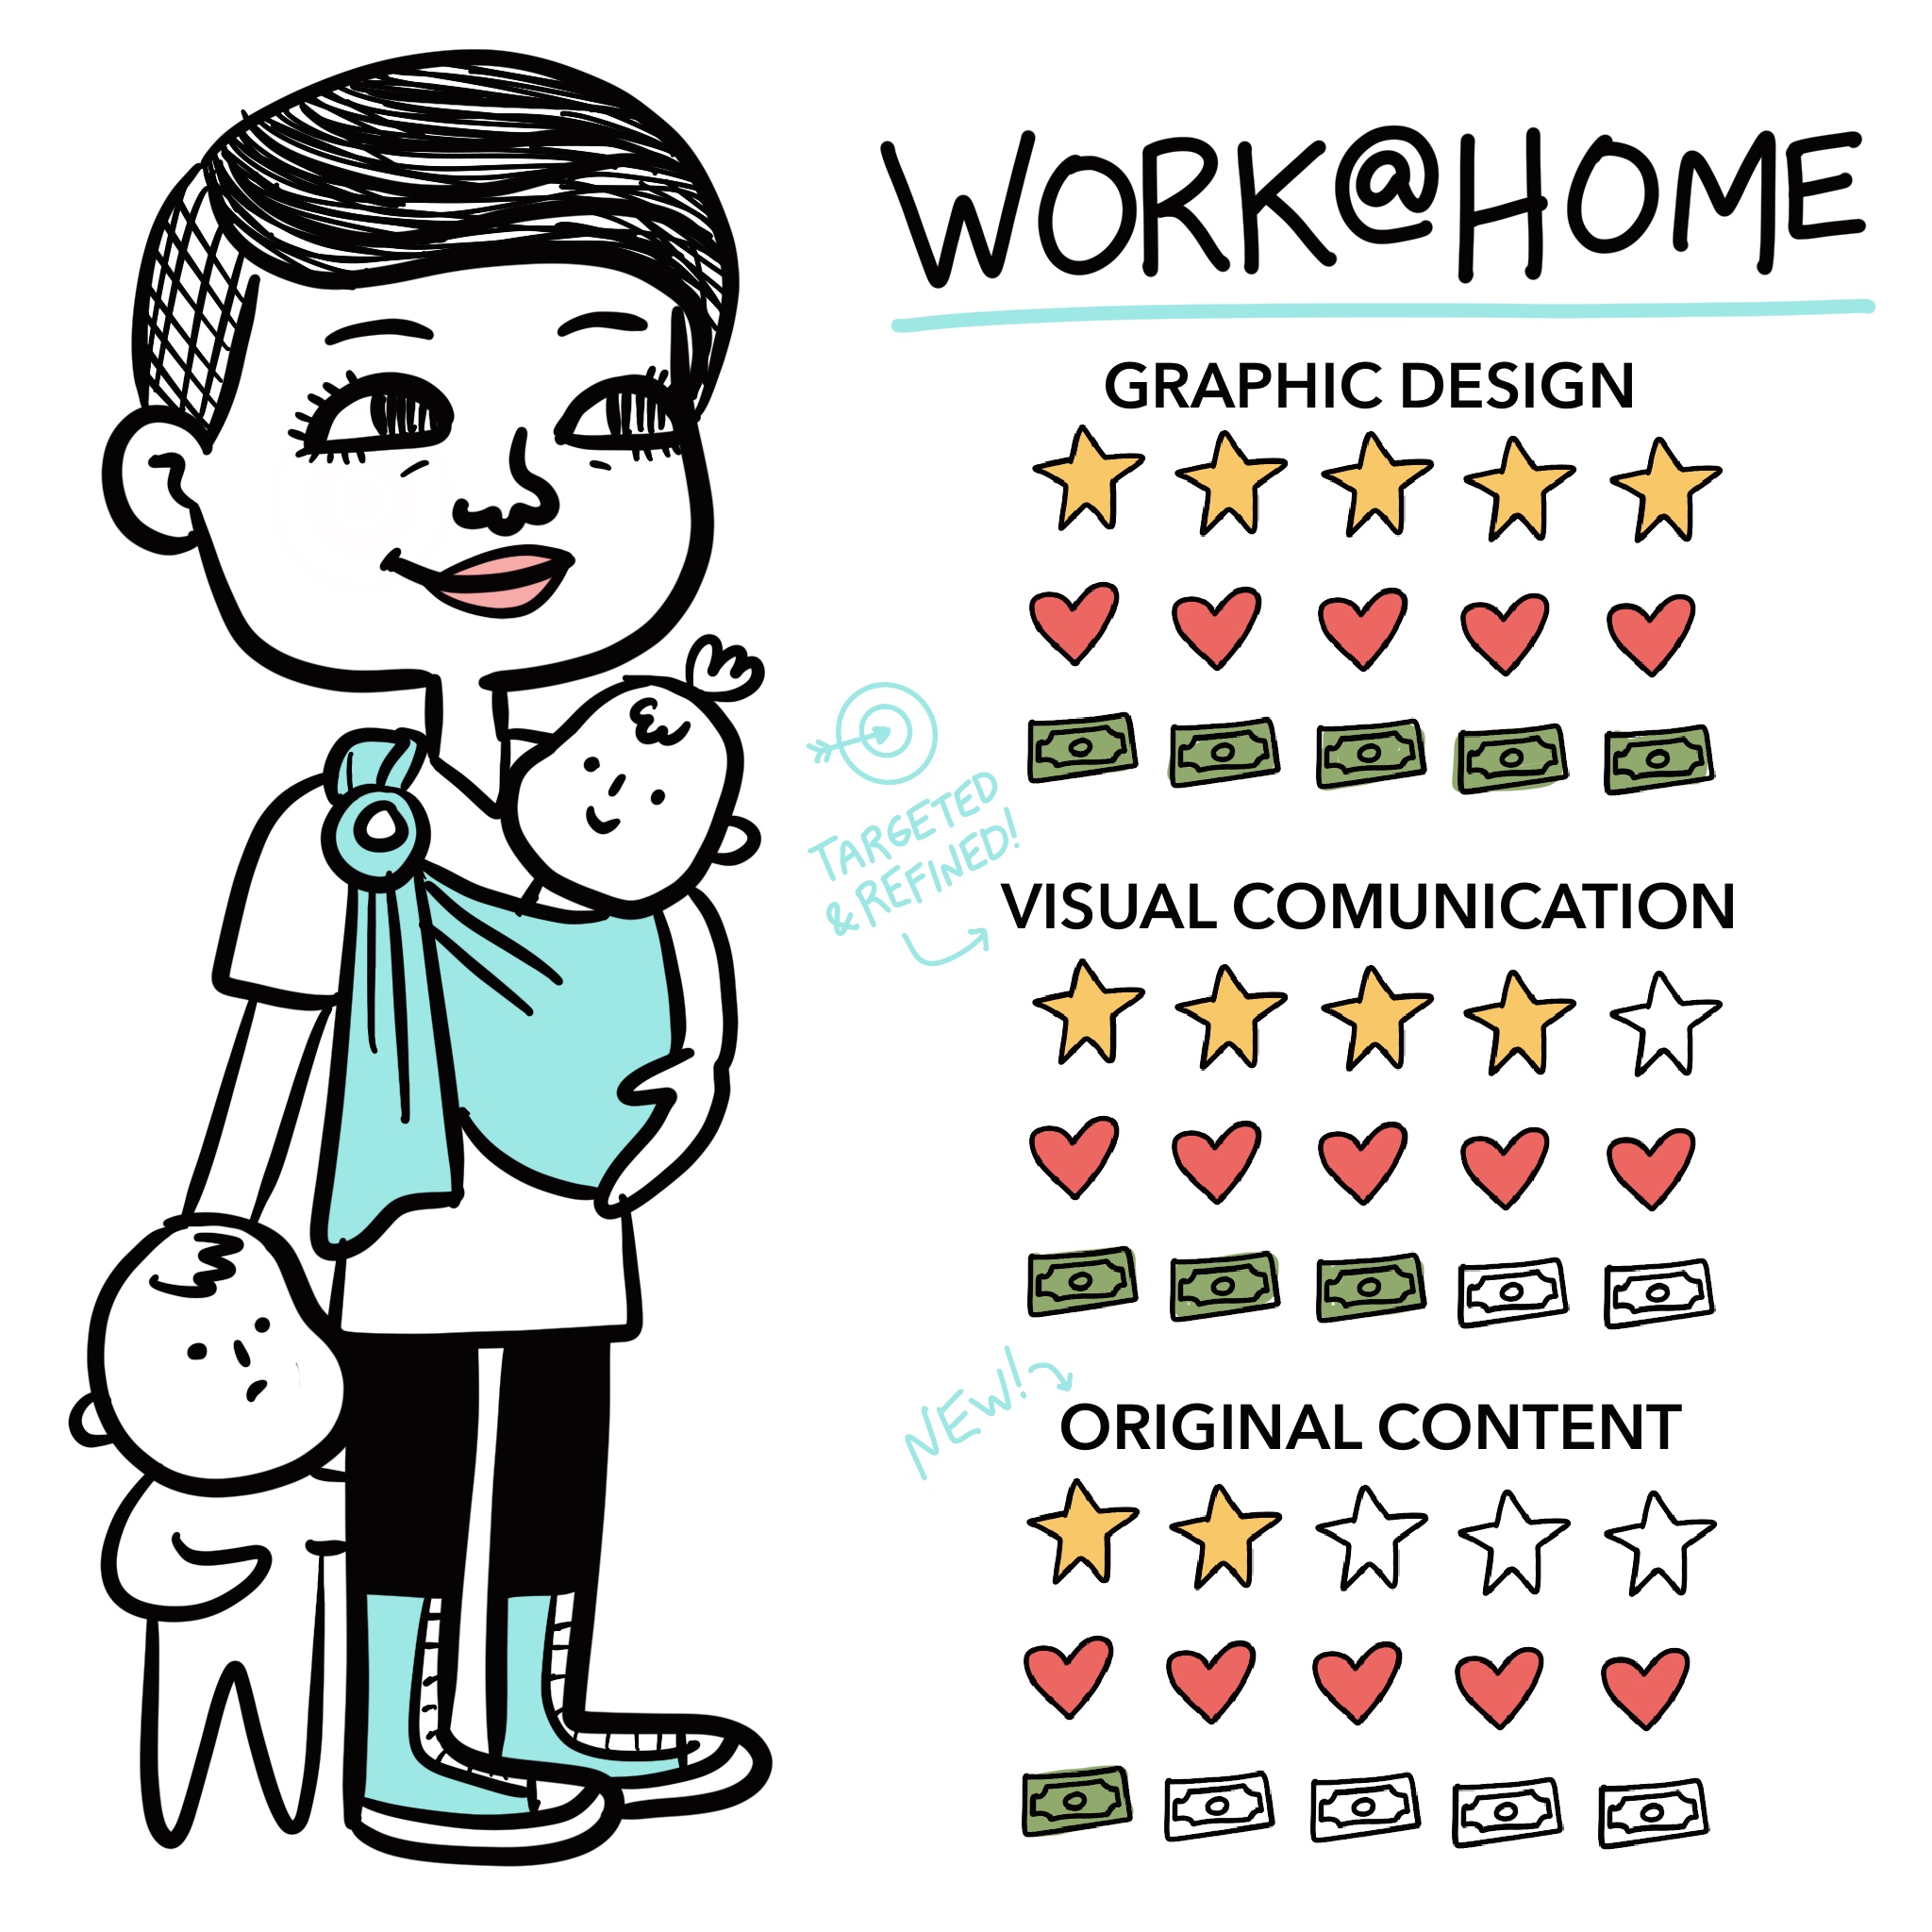 Home-based Working Mom Specializing in Graphic Design and Visual Communication